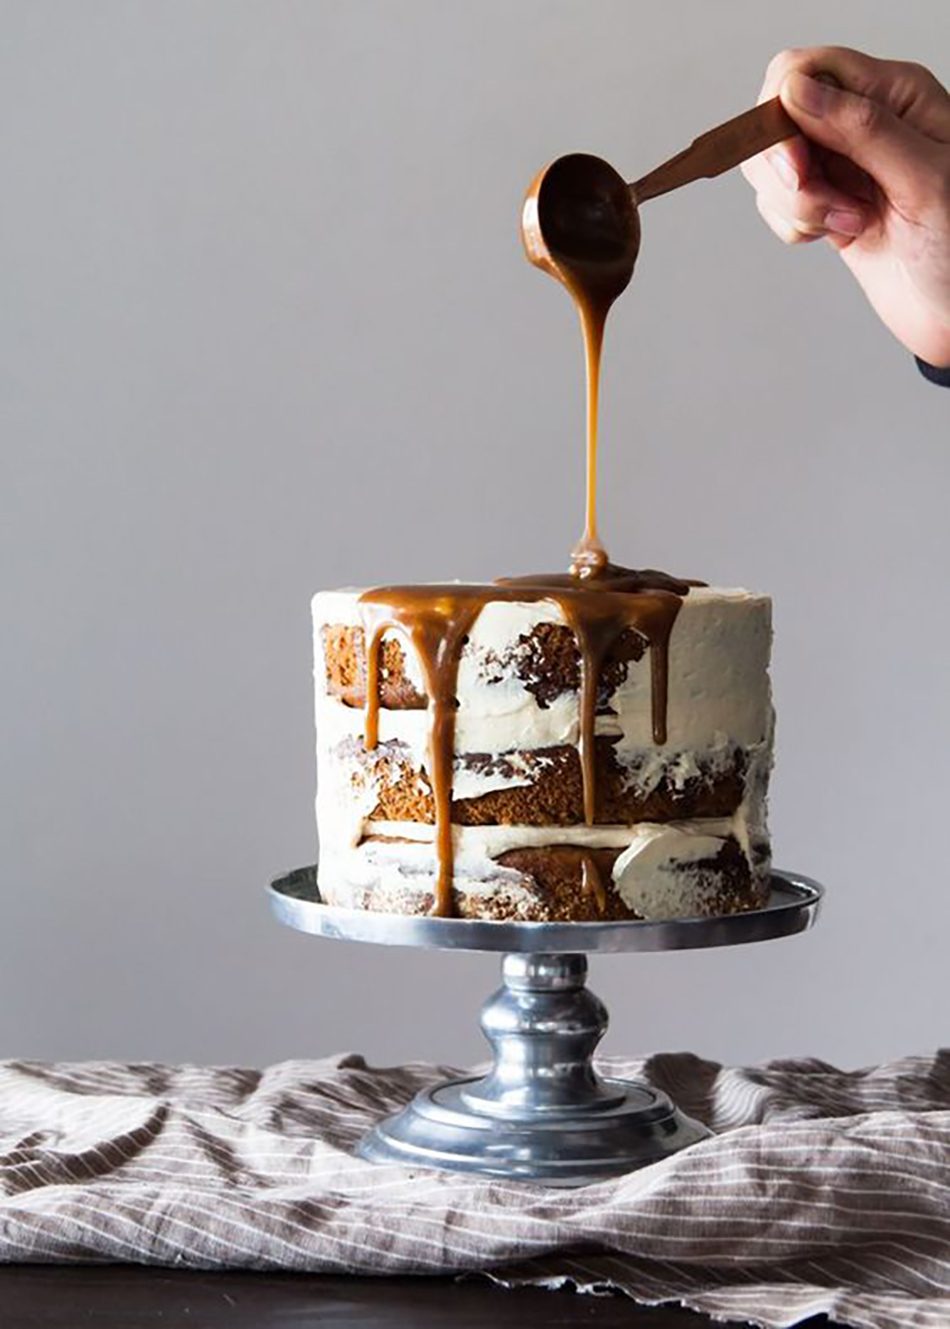 All hail the pudding wedding cake